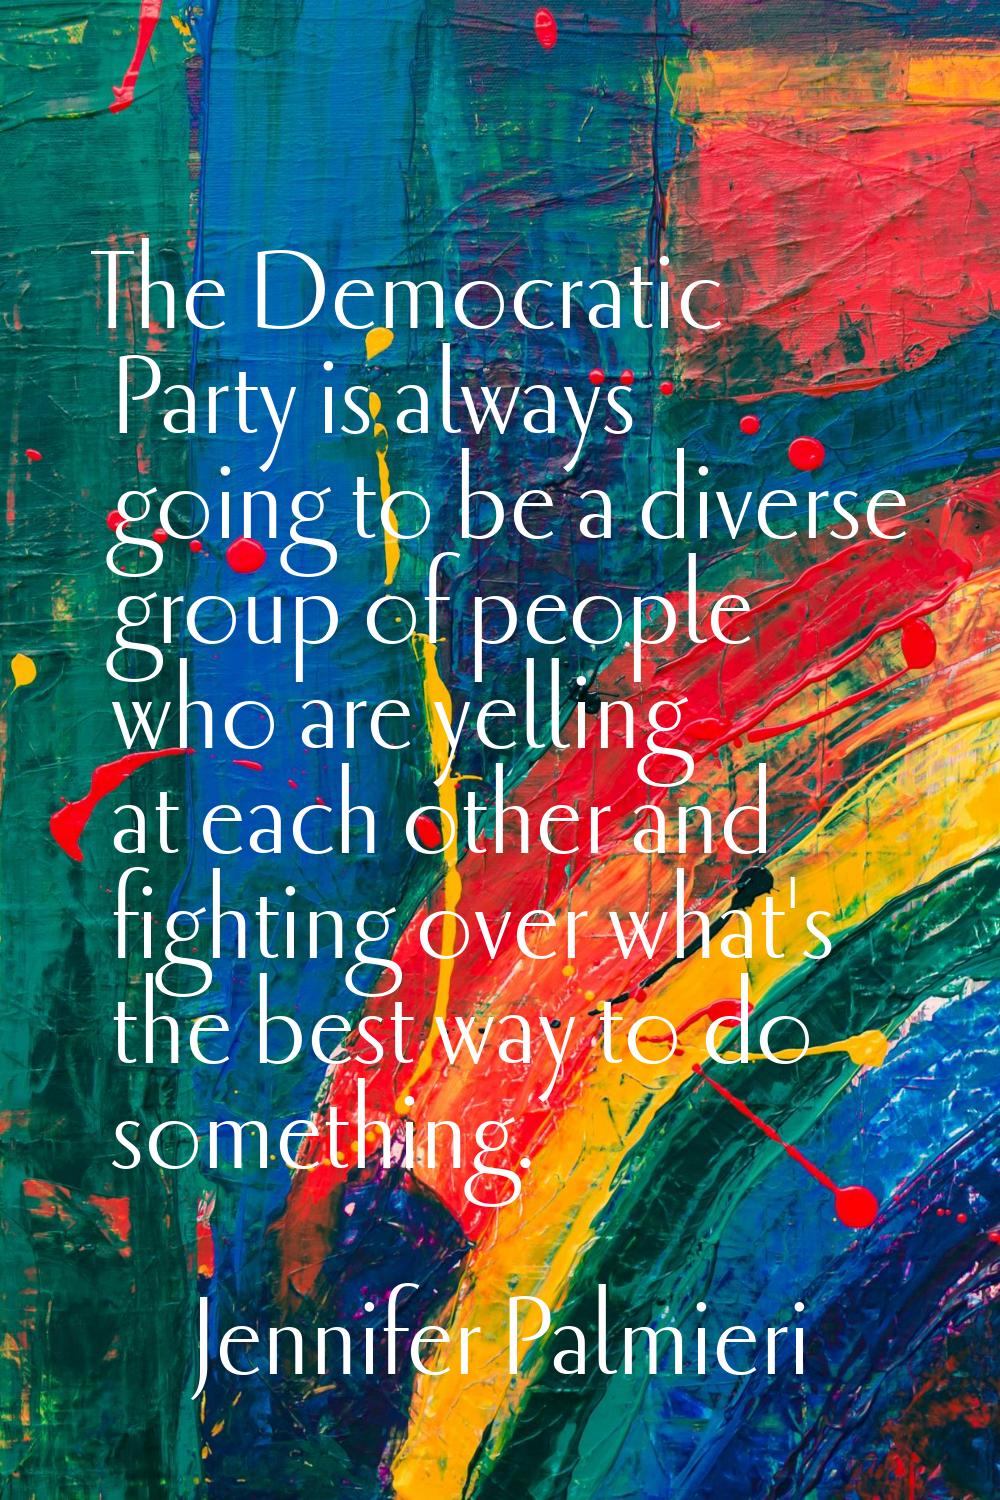 The Democratic Party is always going to be a diverse group of people who are yelling at each other 